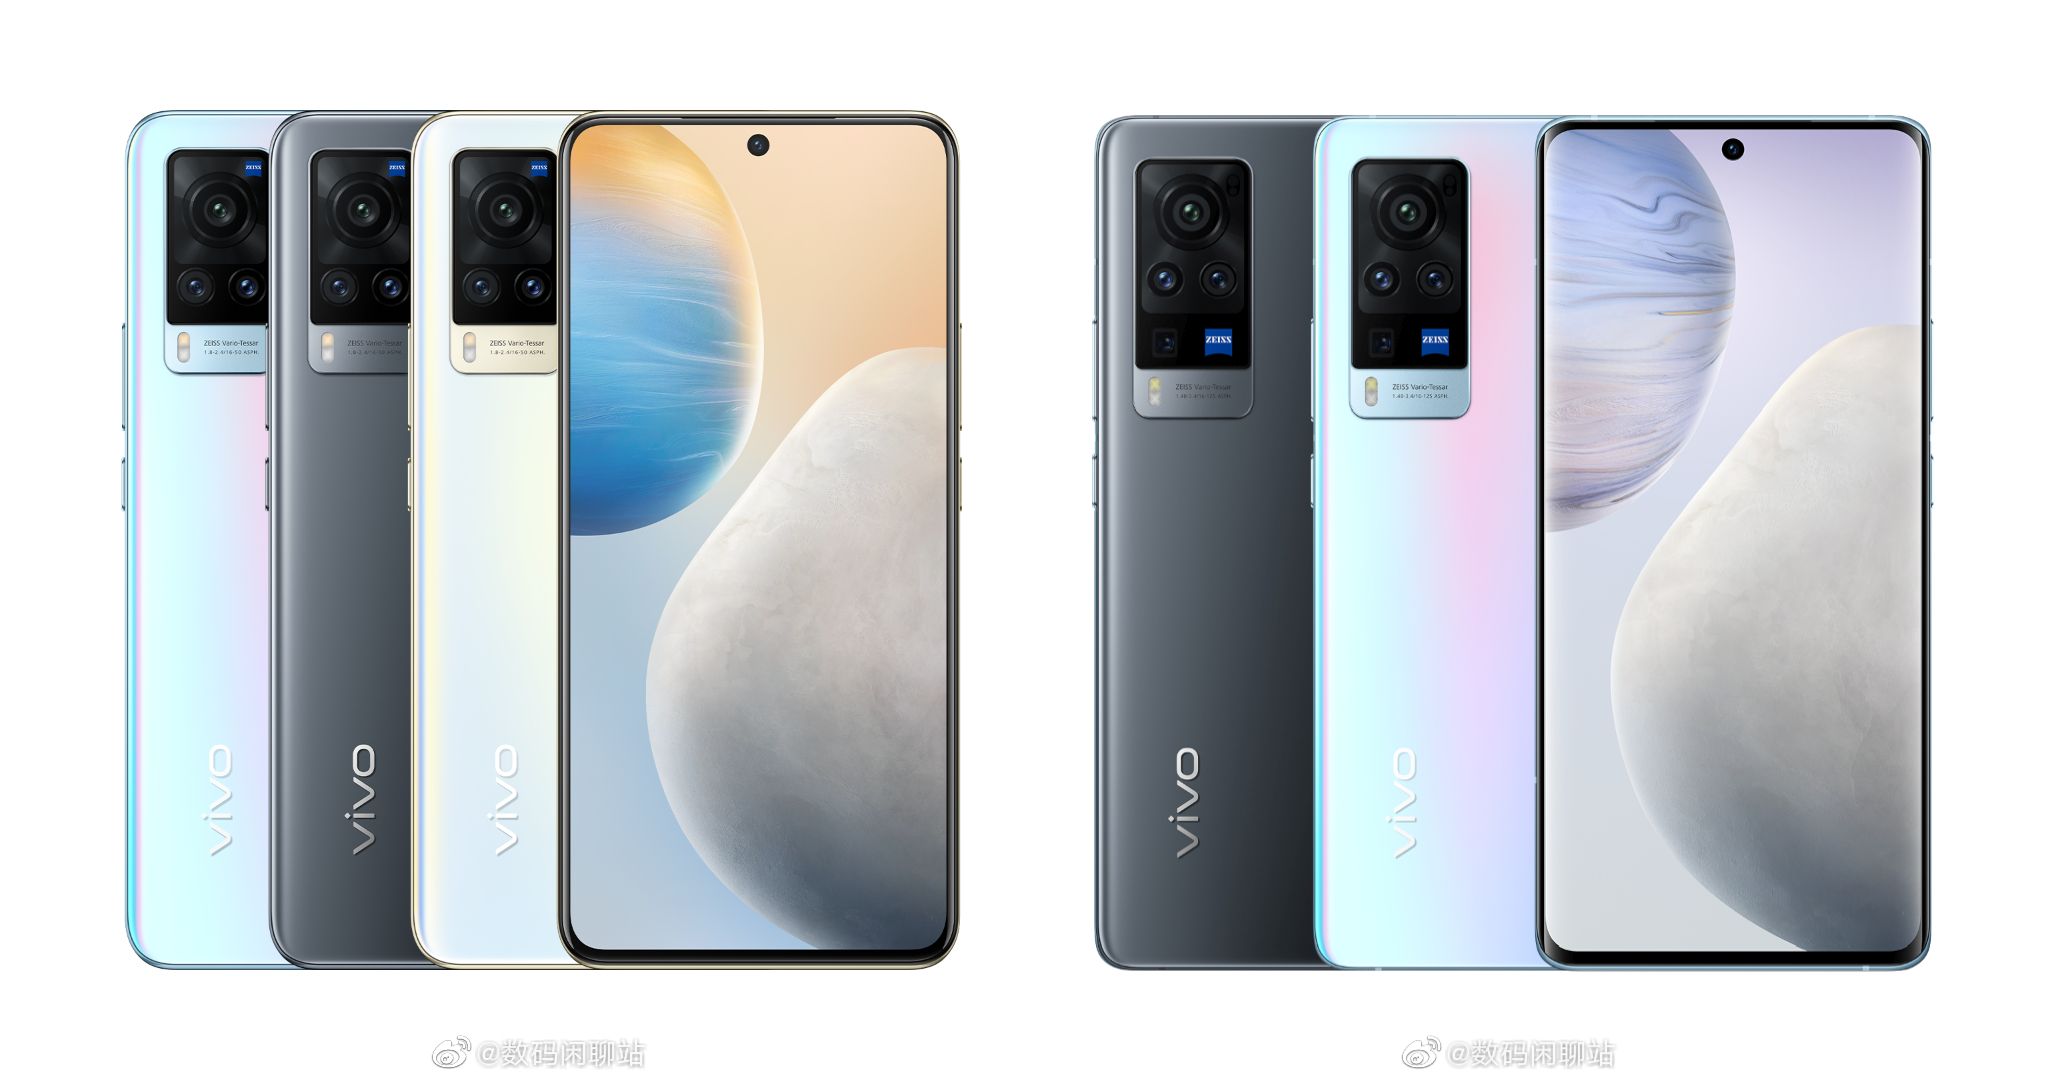 Vivo X100 Pro official renders emerge to reveal design, color options -  Gizmochina